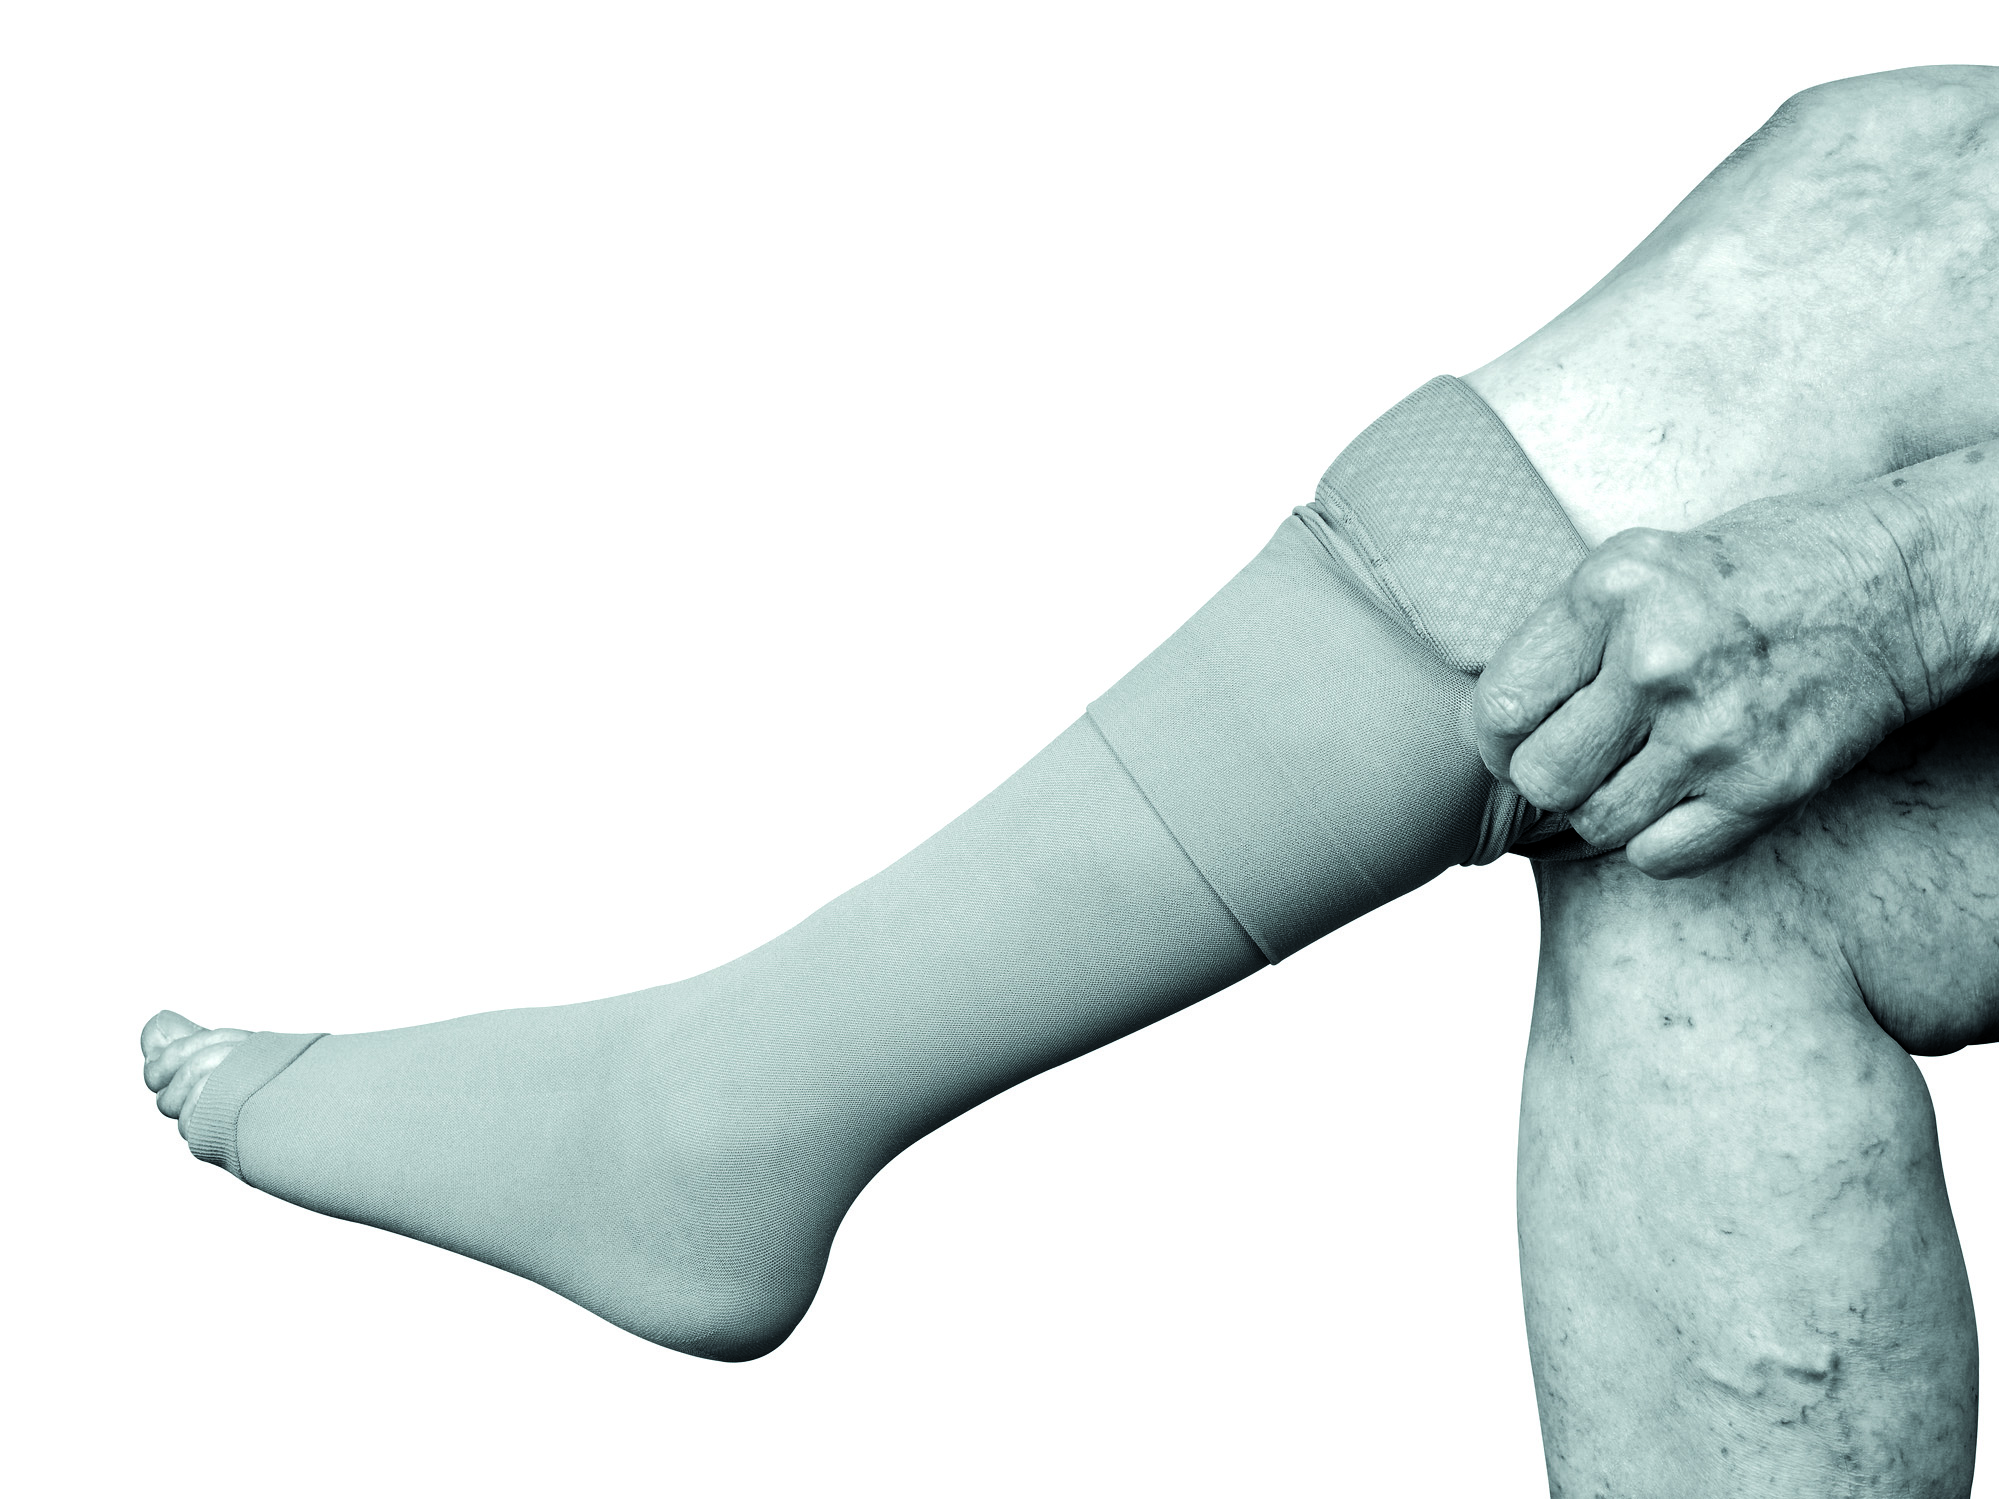 Compression stockings might not be needed to prevent blood clots